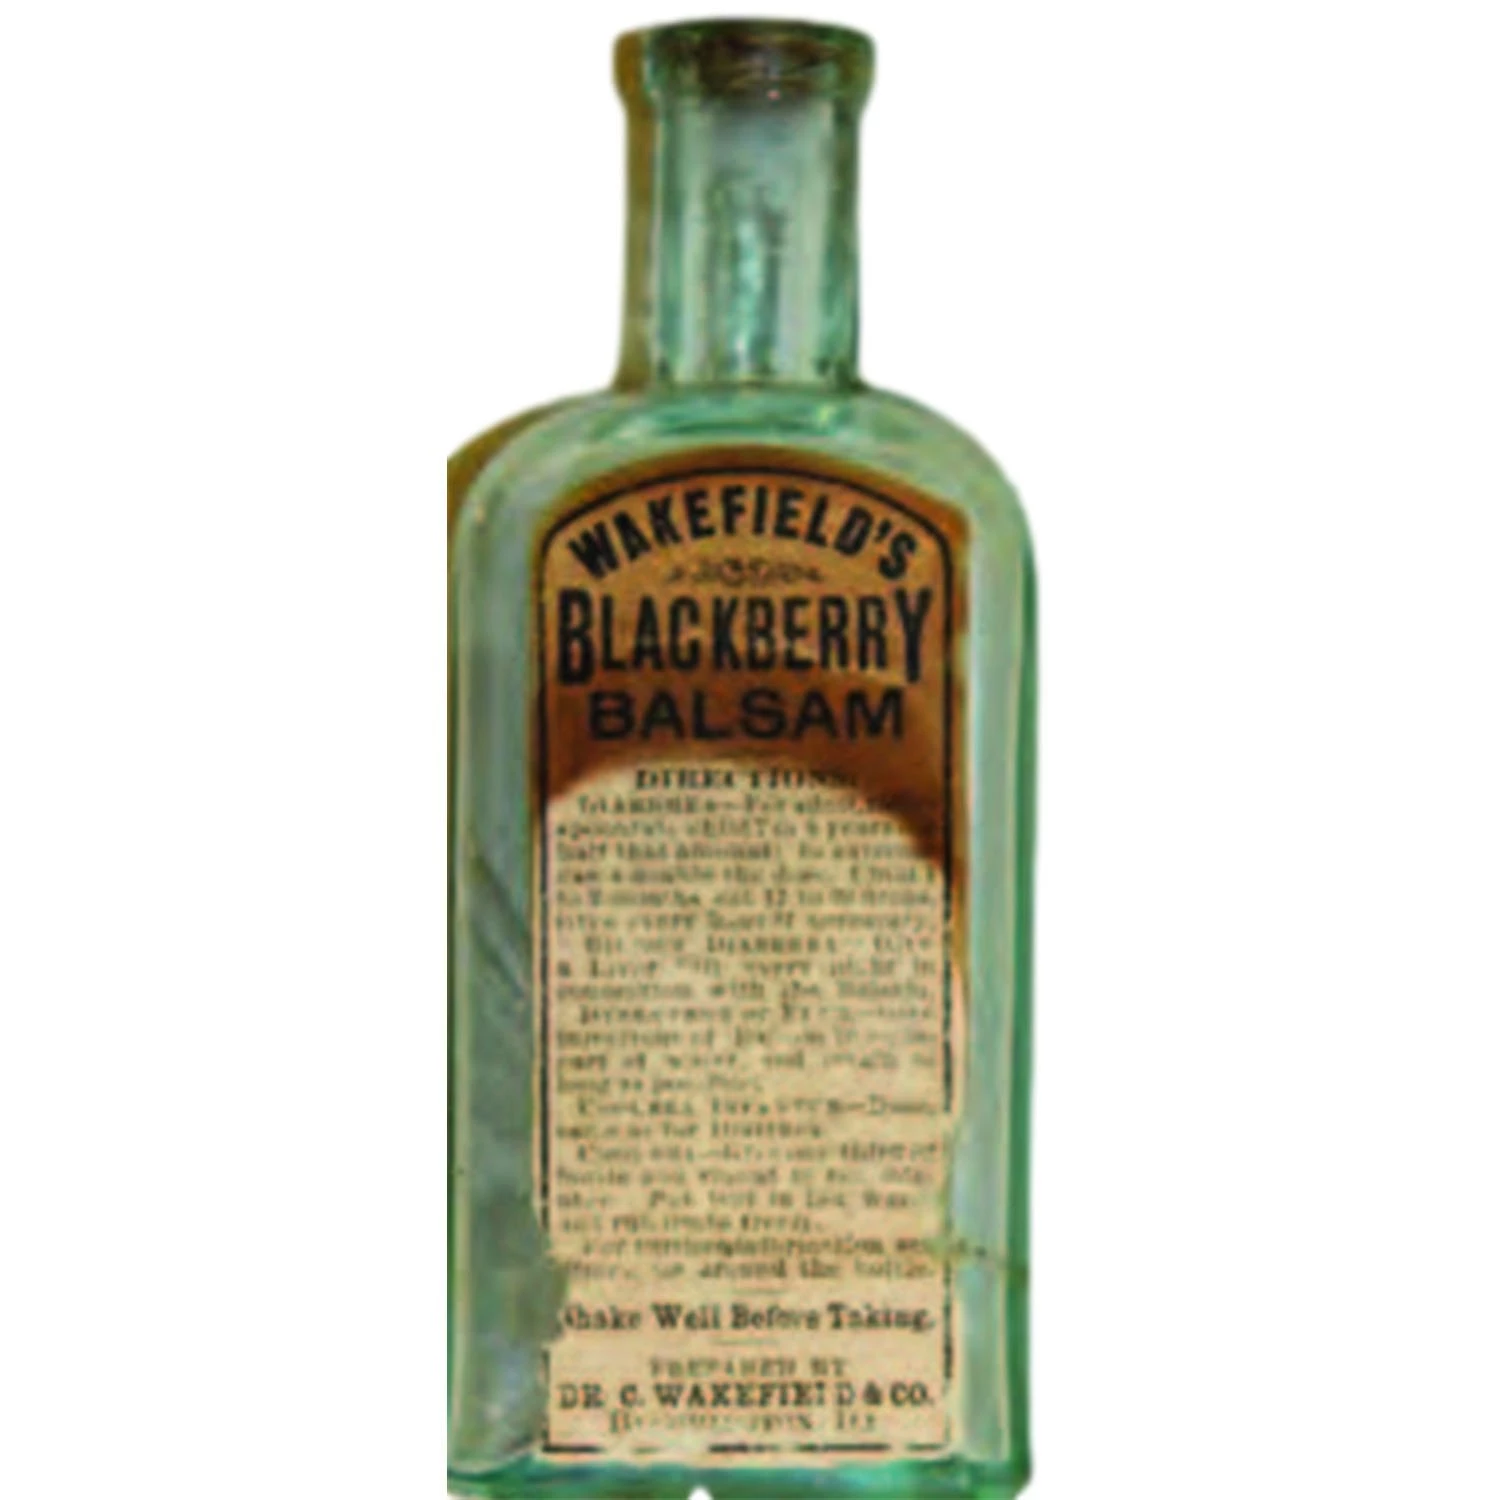 a small bottle with a long neck, again has a lot of text on the label.